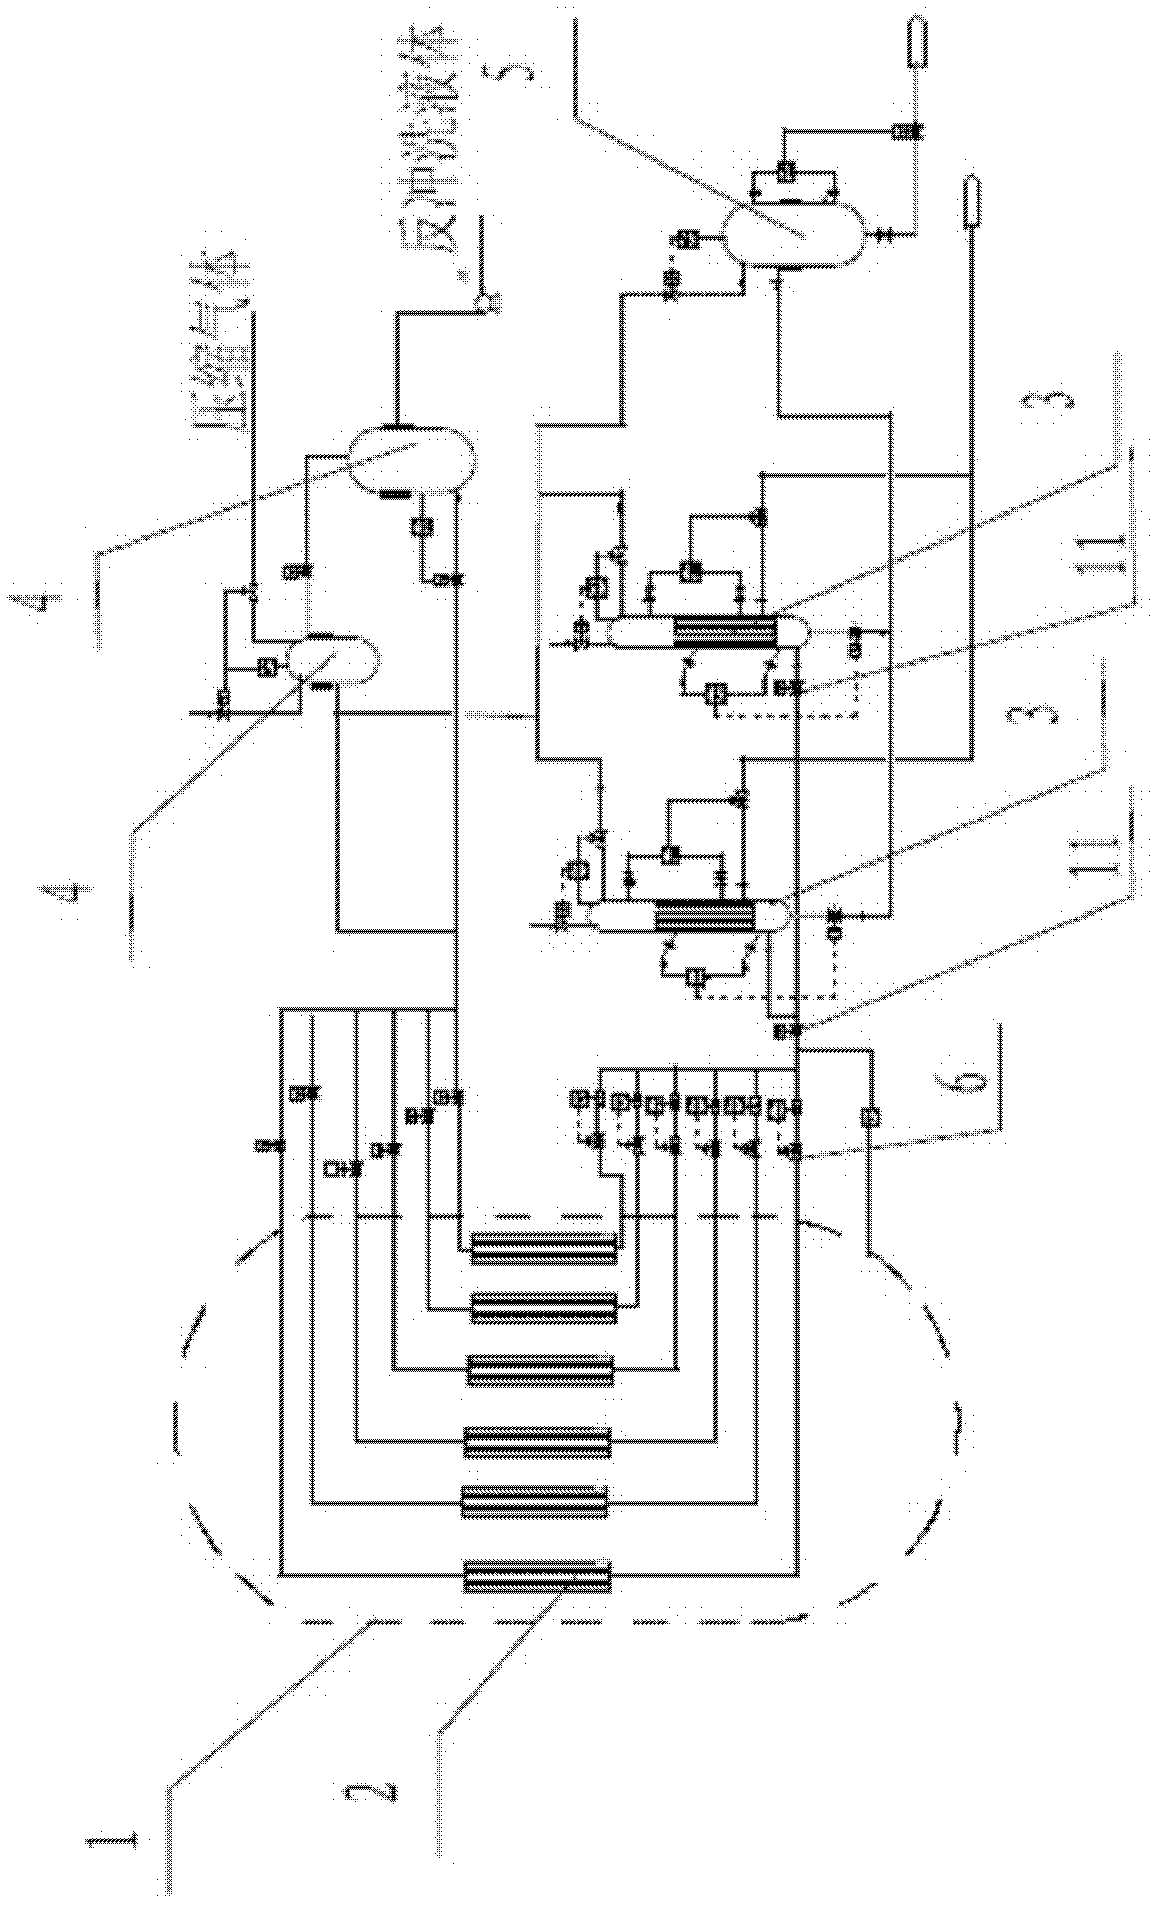 Product filtering system for three-phase slurry bed reactor